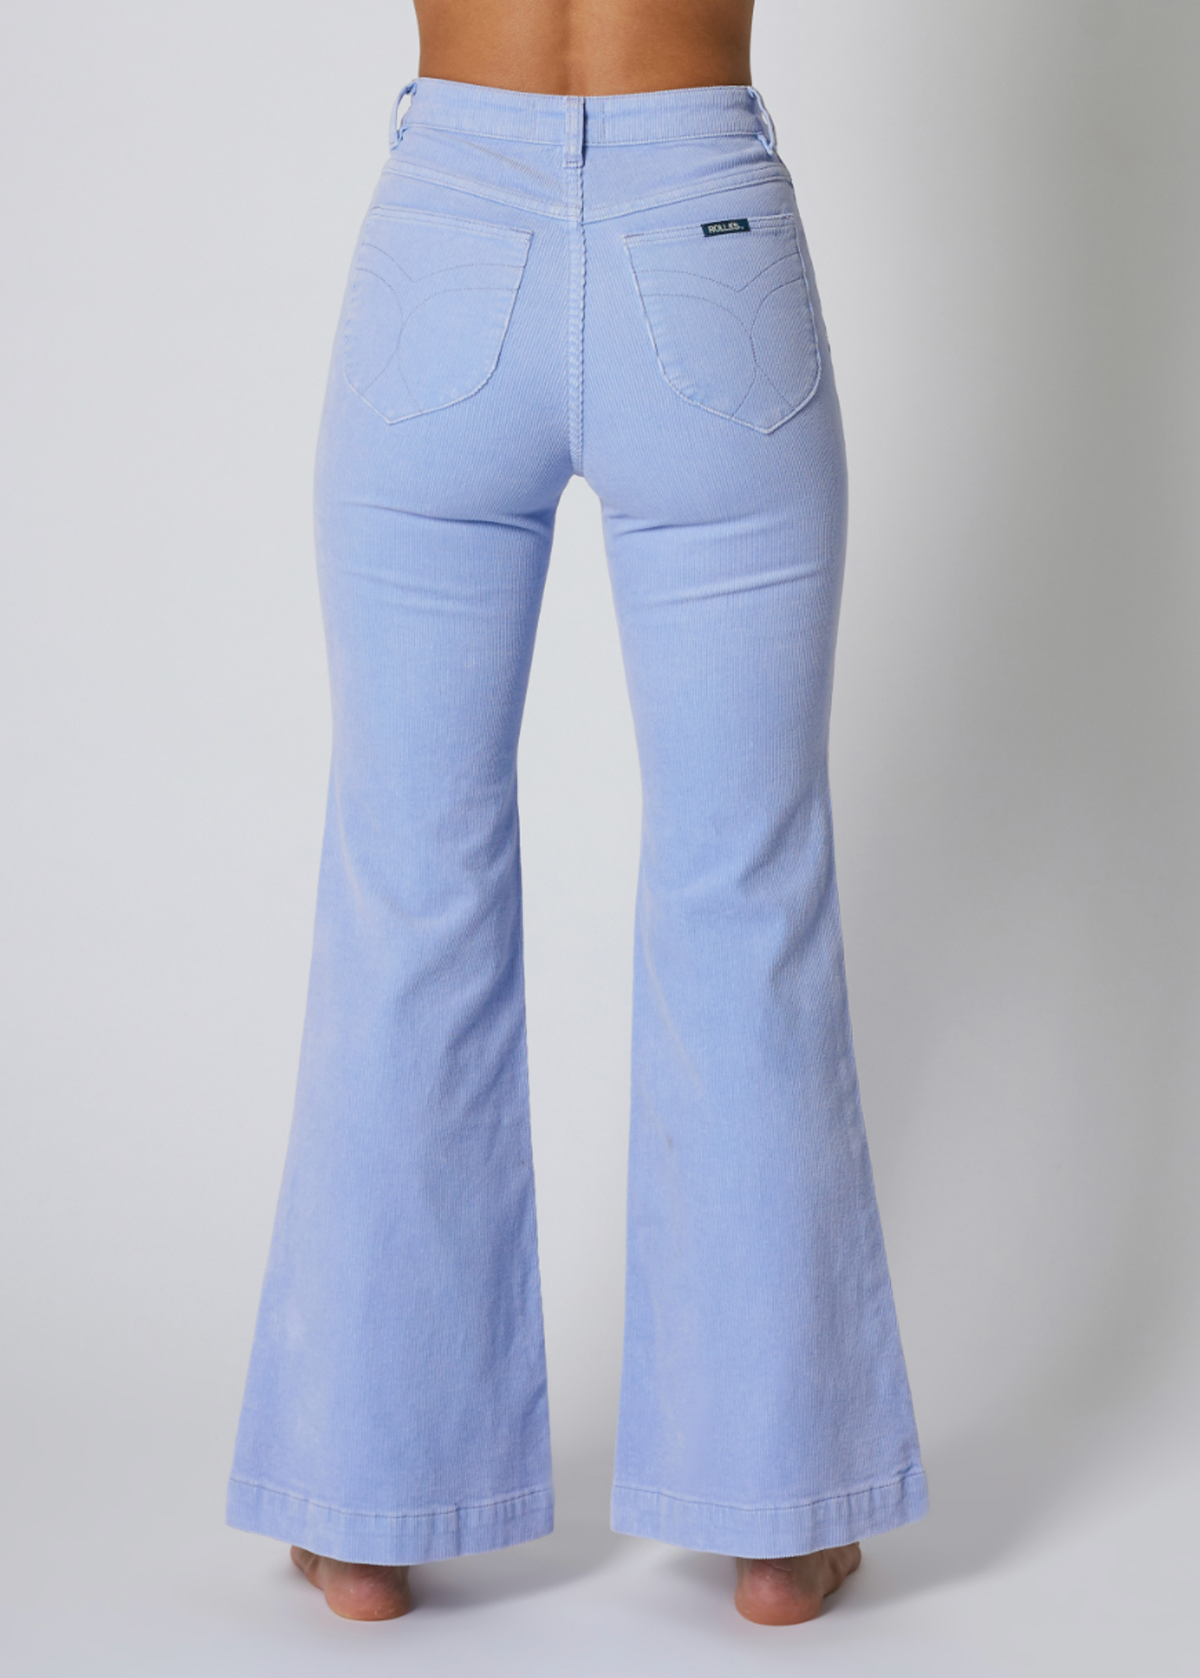 Rolla's Jeans Wisteria Blue Corduroy Flares. 70s inspired bell bottoms with a high rise waist, velvety thin wale corduroy, and a flare leg